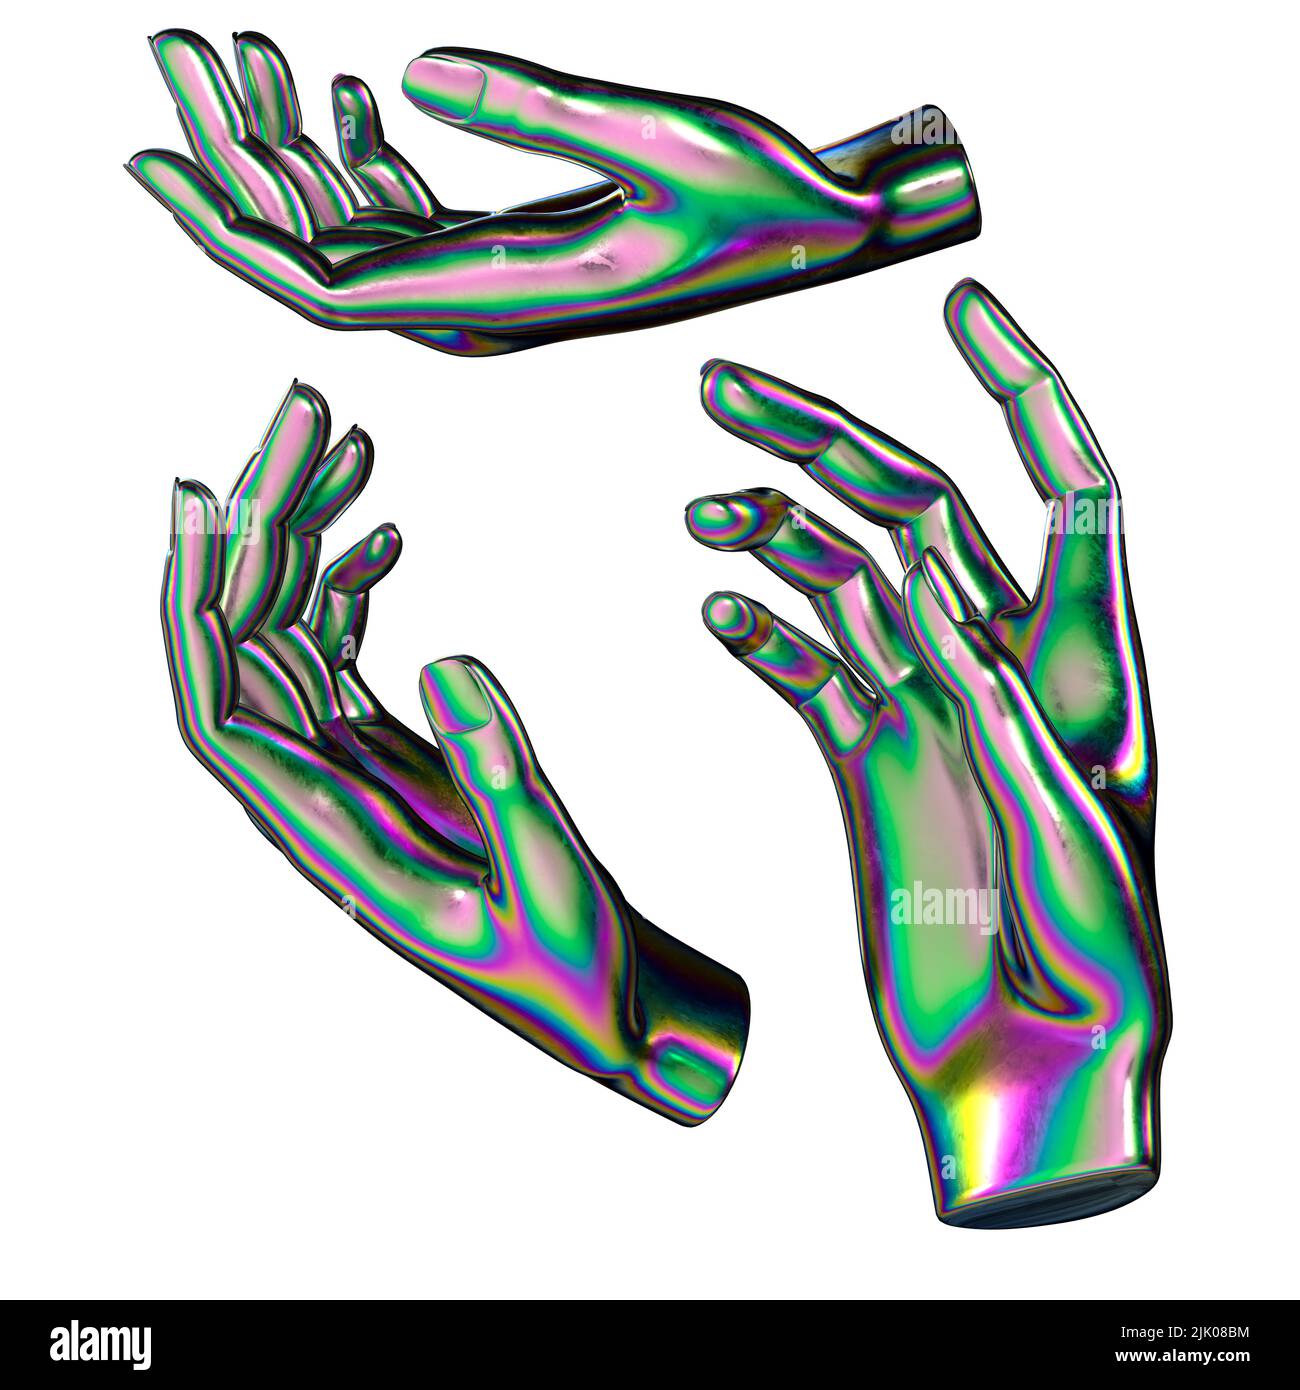 metallic iridescent futuristic hands in different poses with psychedelic colors - 3D illustration of human hands sculpture statue Stock Photo